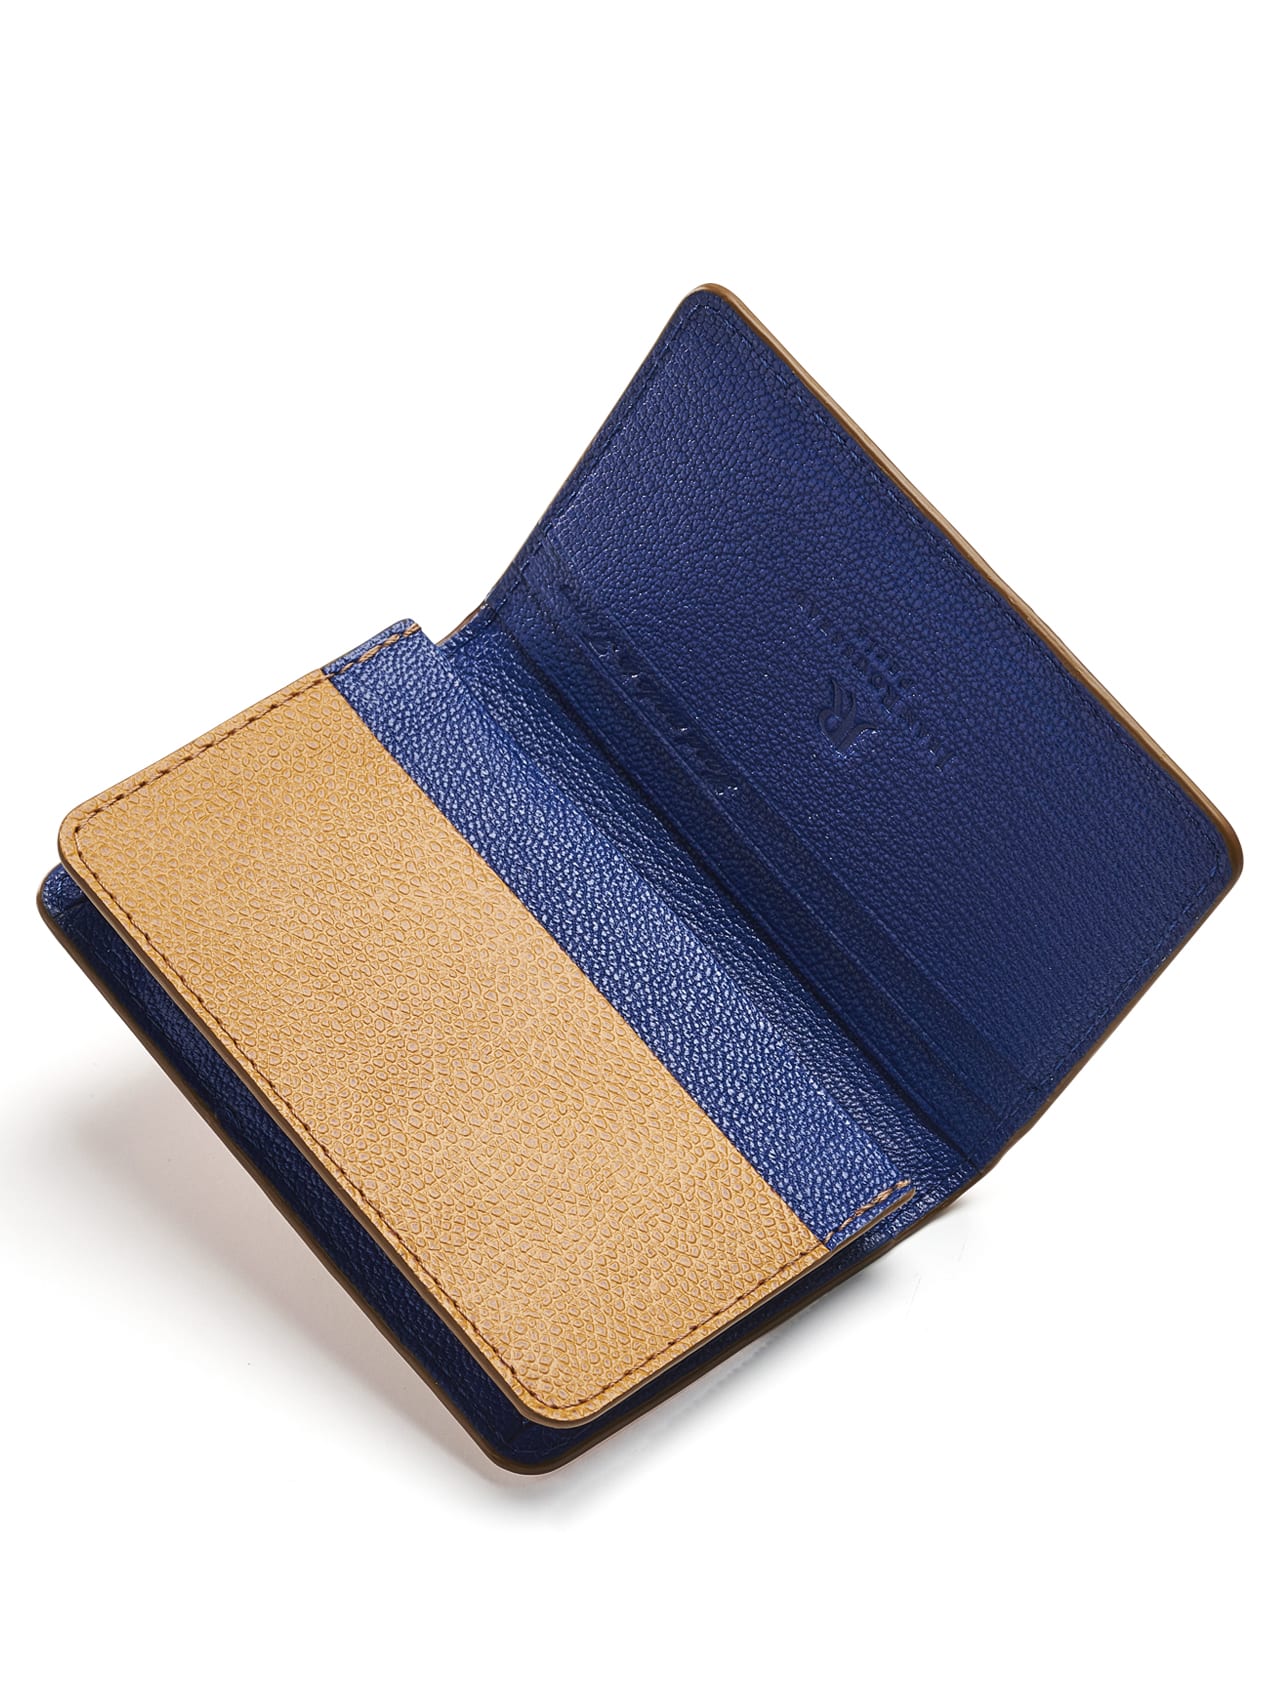 business card holder leather brown blue leather